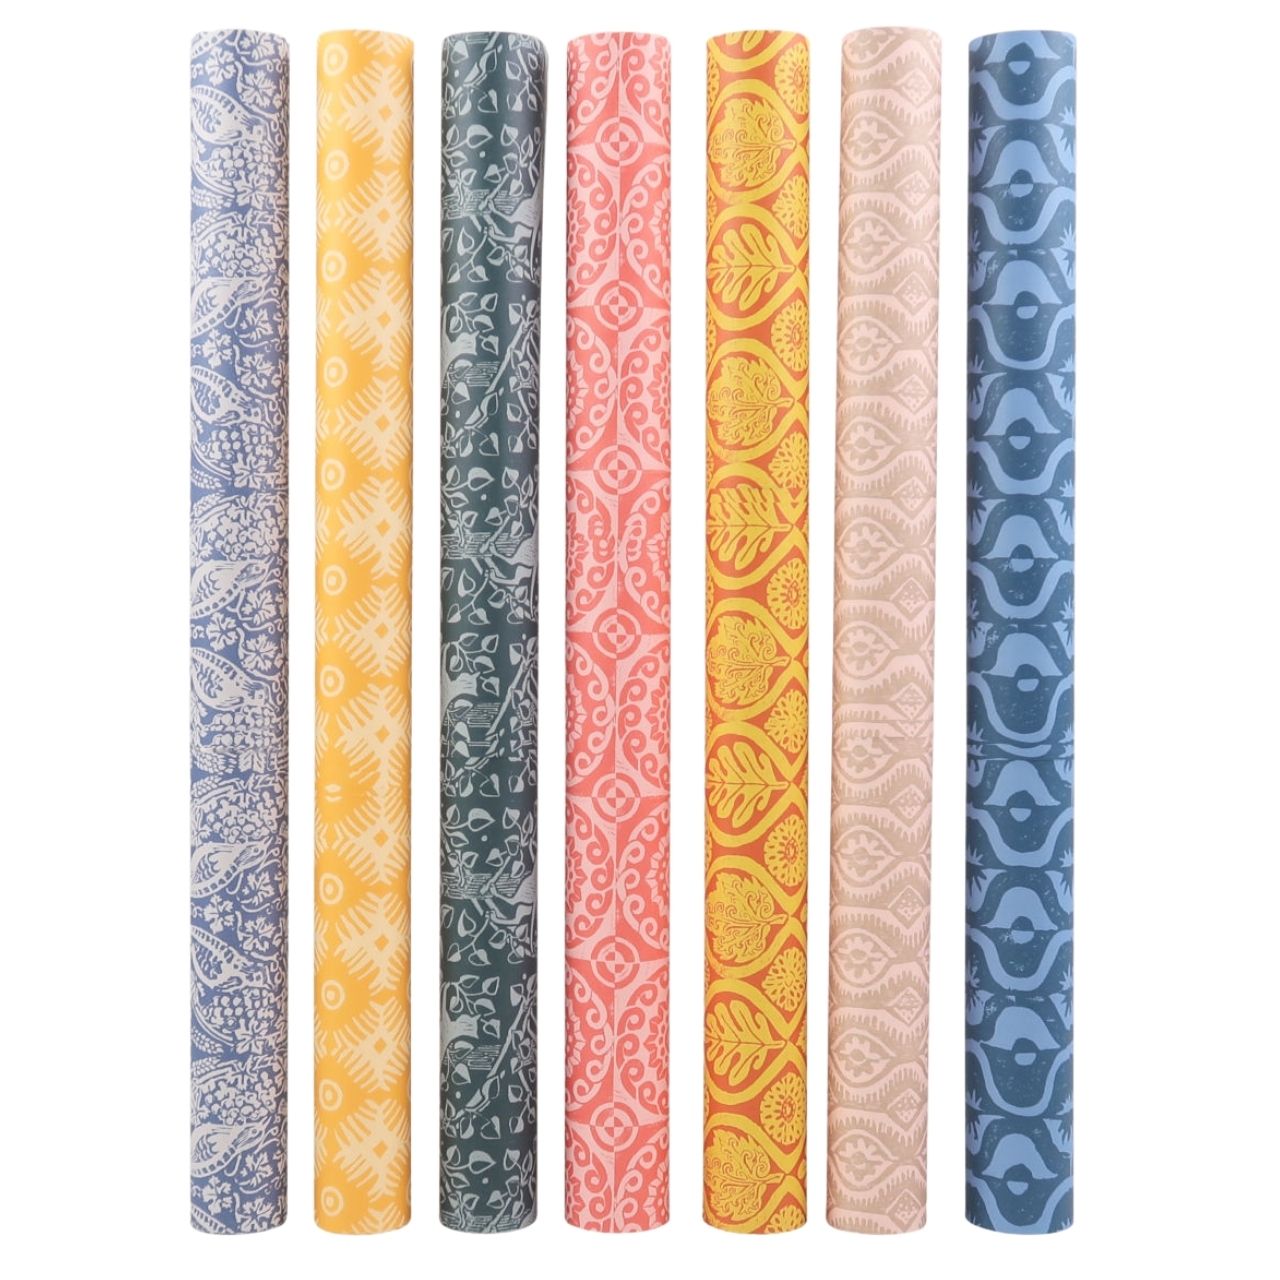 Cambridge Imprint Peggy Angus Patterned Paper for Cambridge Imprint - 7 sheets of  Wrapping Paper